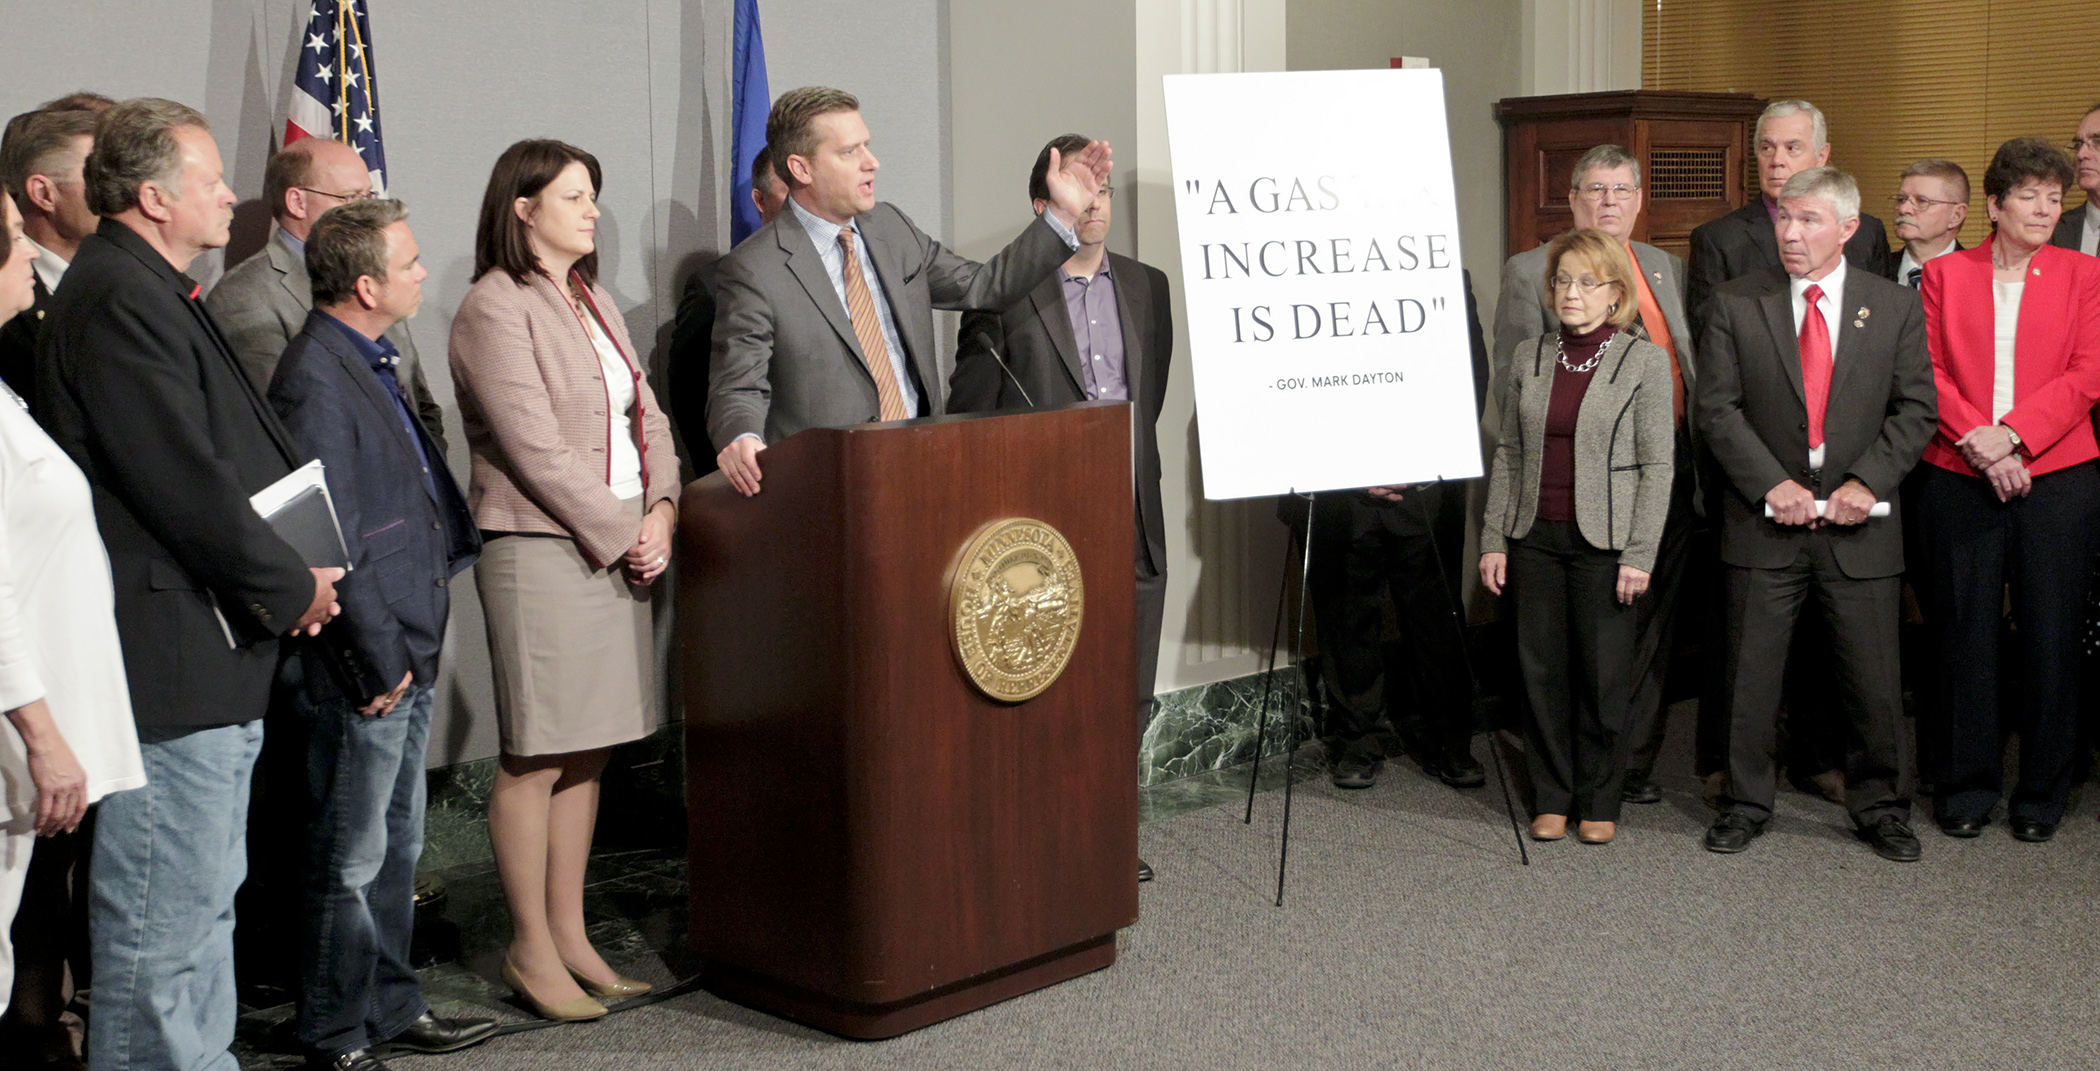 Standing next to a poster with a quote from Gov. Mark Dayton, House Speaker Kurt Daudt and members of the Republican caucus urge the governor to put forth a transportation funding plan that does not increase the gas tax. Photo by Paul Battaglia